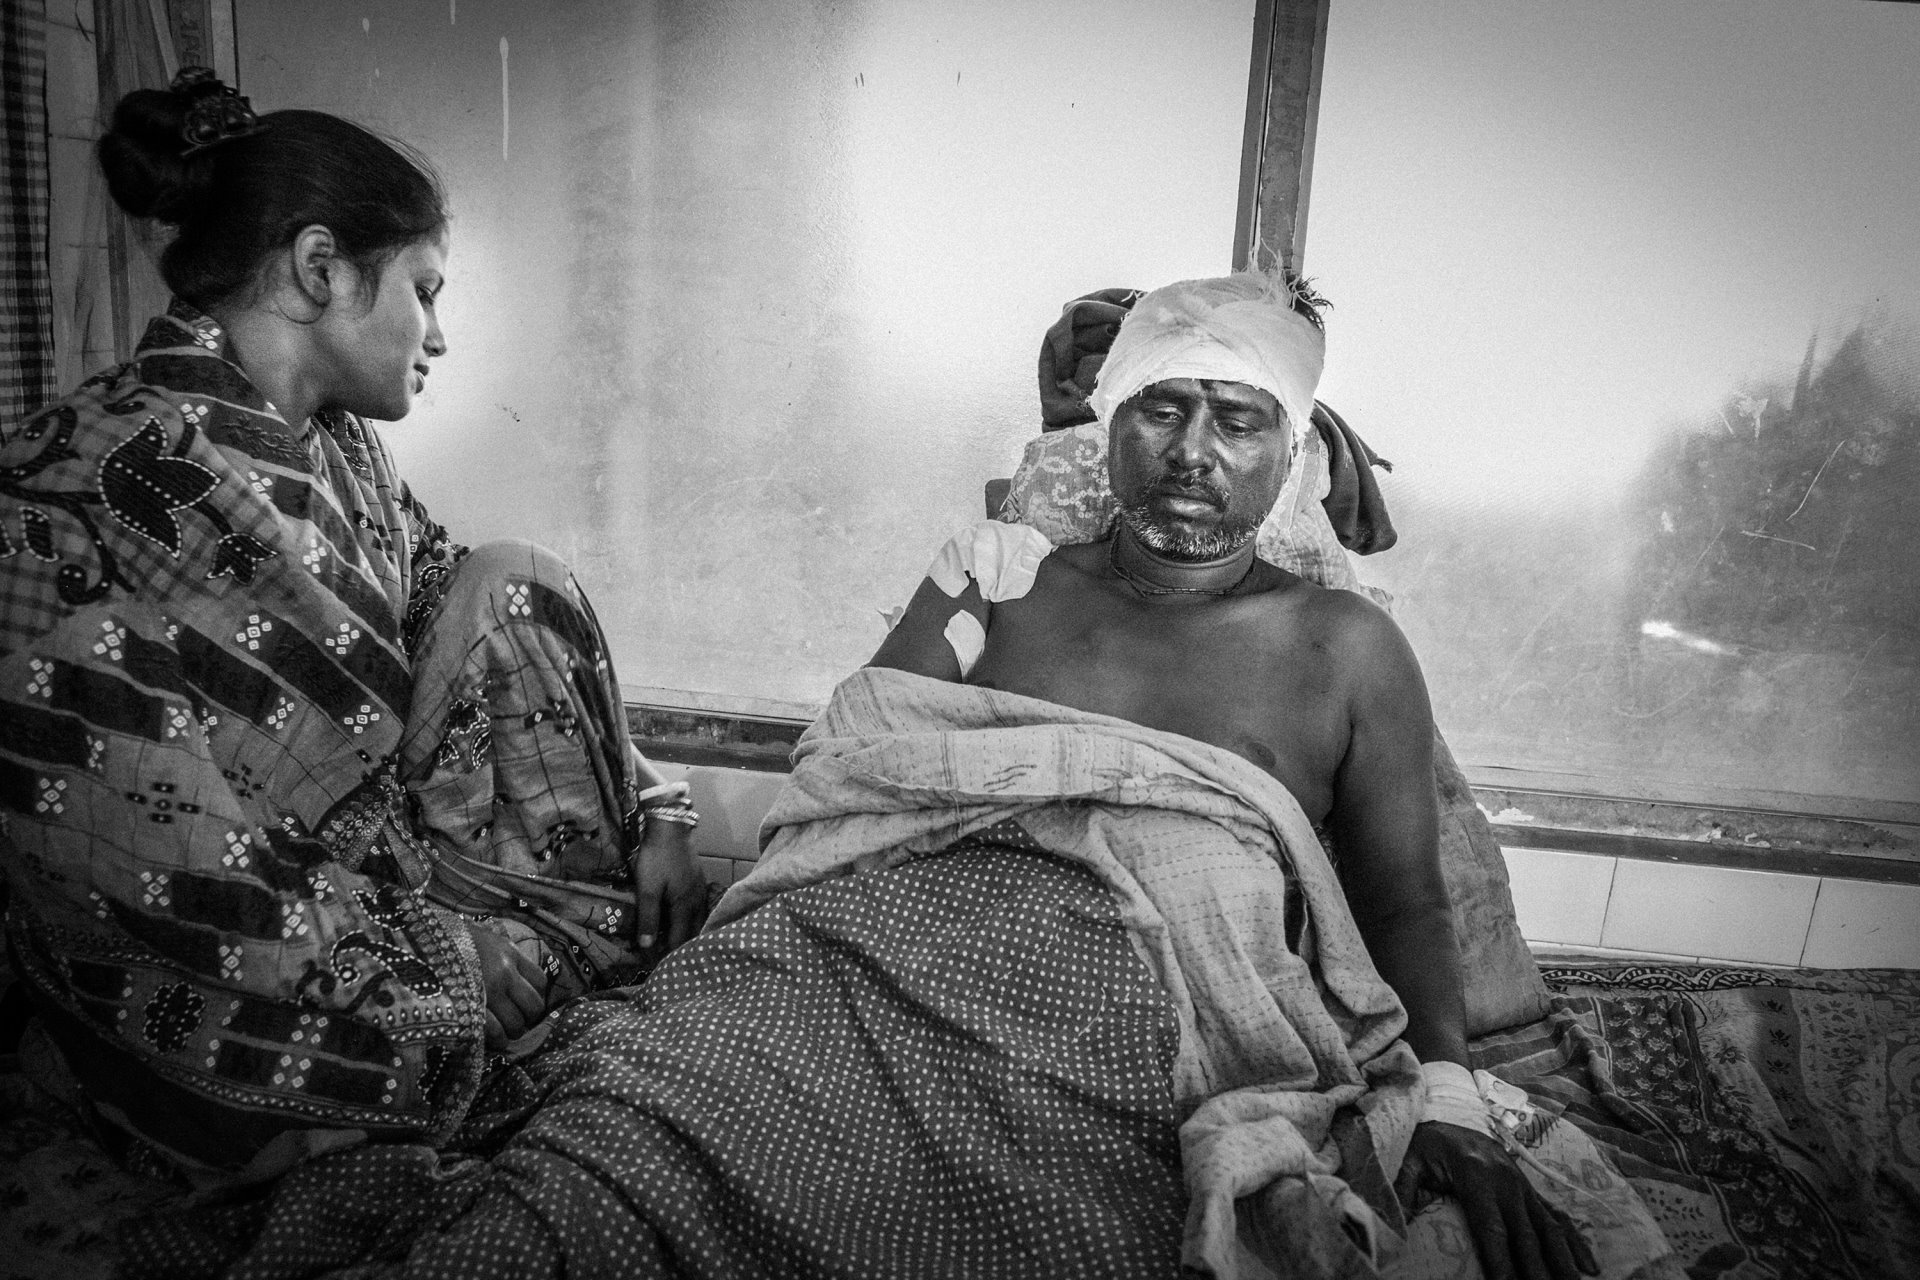 <p>Manoranjan Biwas lies seriously injured after being attacked by a tiger when he was collecting crabs in the forest buffer zone of the Sundarban Tiger Reserve, in a delta region of West Bengal, India. Biwas is waiting for government compensation. Compensation for direct attacks on humans is fairly speedy, as such attacks are rare, but compensation for lost livestock may fail owing to the scale of the problem, and the expense and administration involved in verifying claims.</p>
